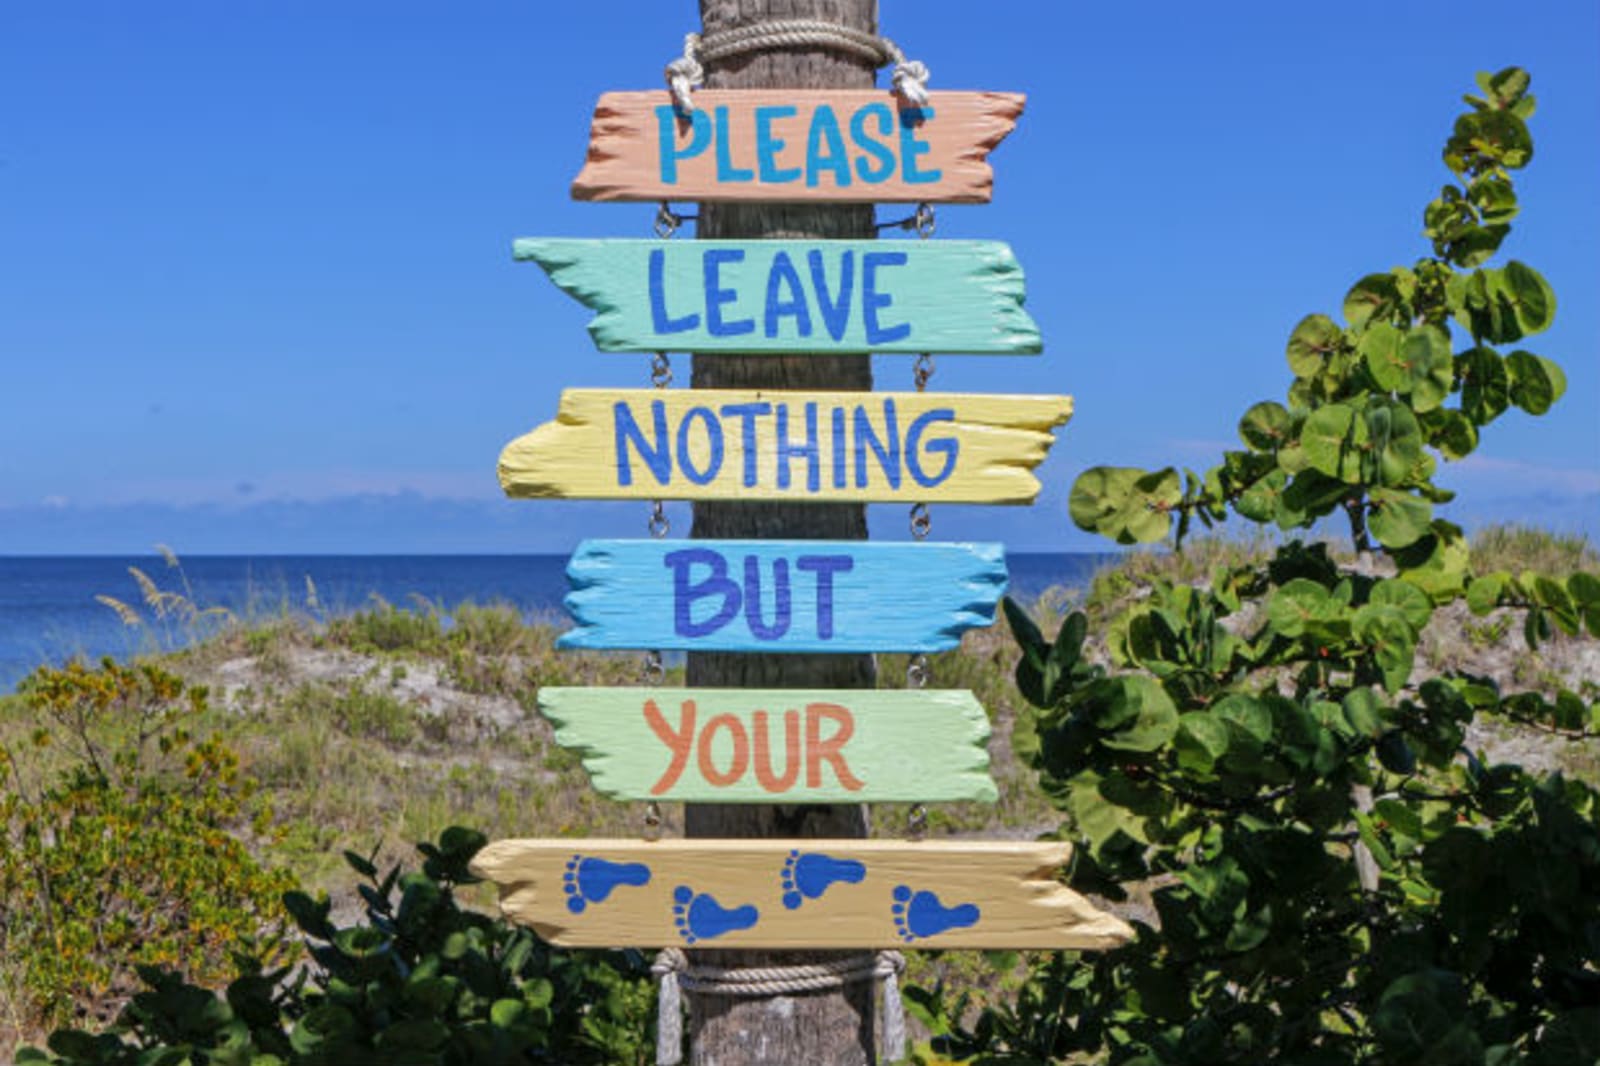 Wooden signpost that reads "Leave nothing but your" and then images of footprints